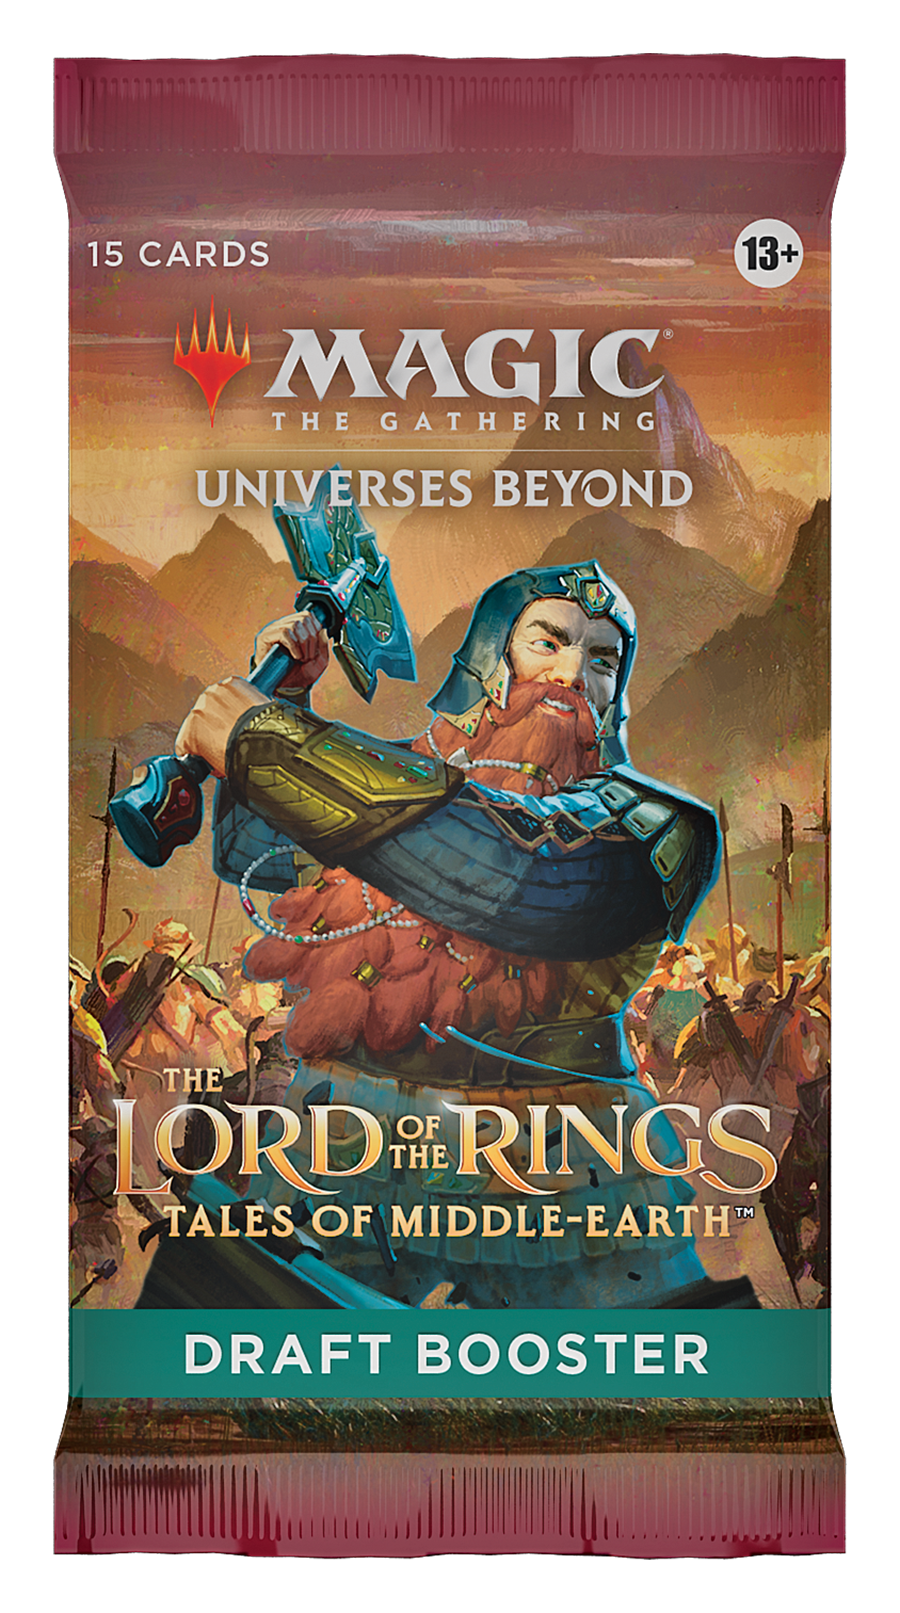  Magic: The Gathering The Lord of The Rings: Tales of